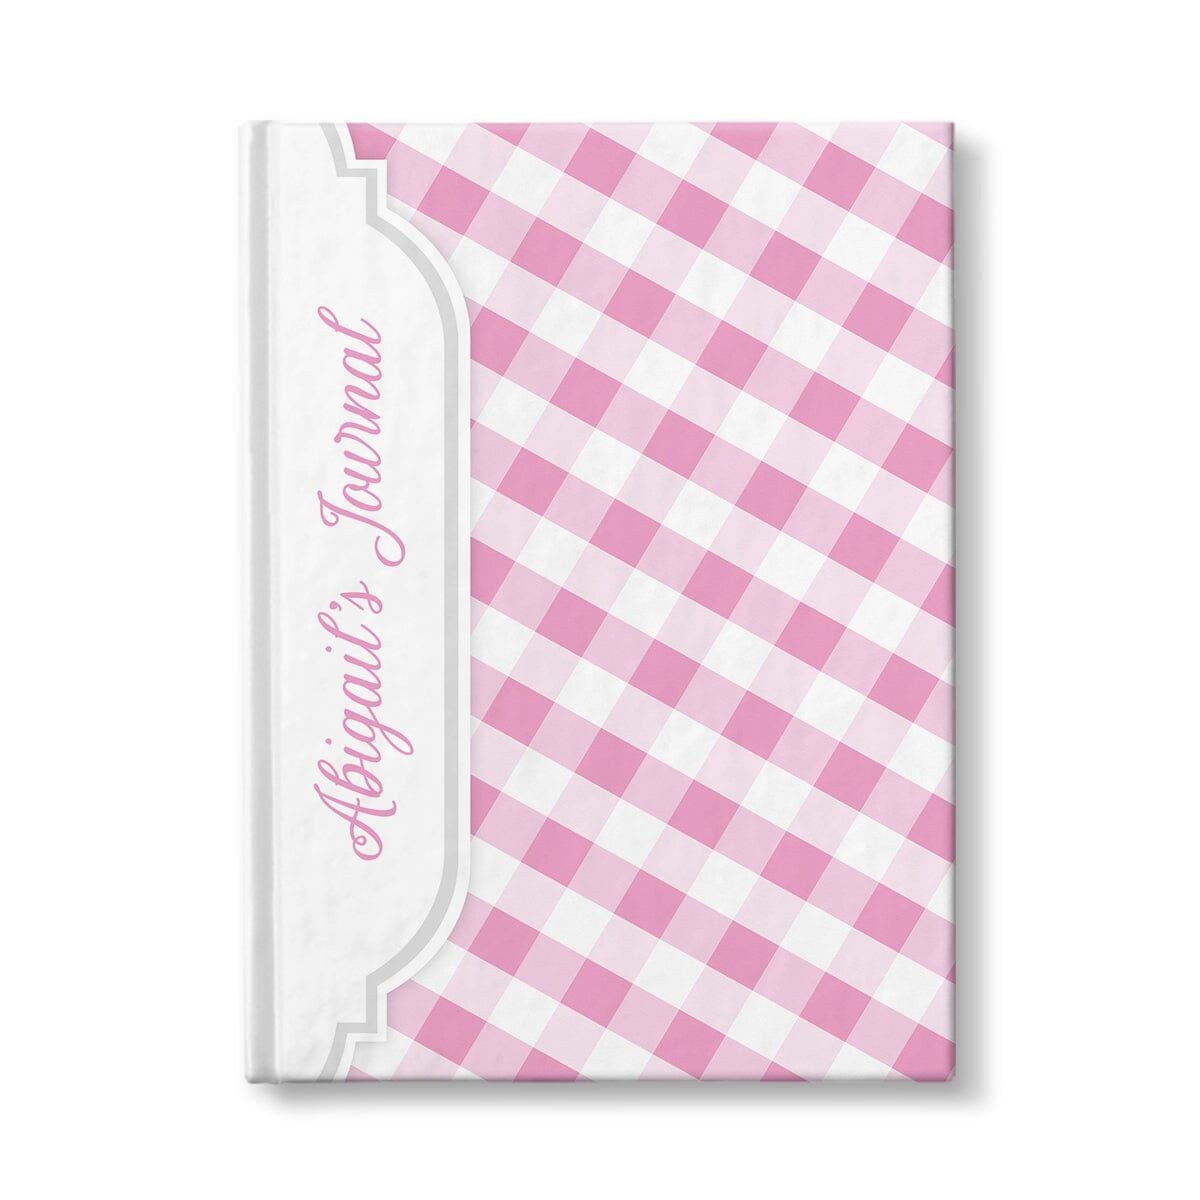 Personalized Pink Gingham Journal at Artistically Invited.